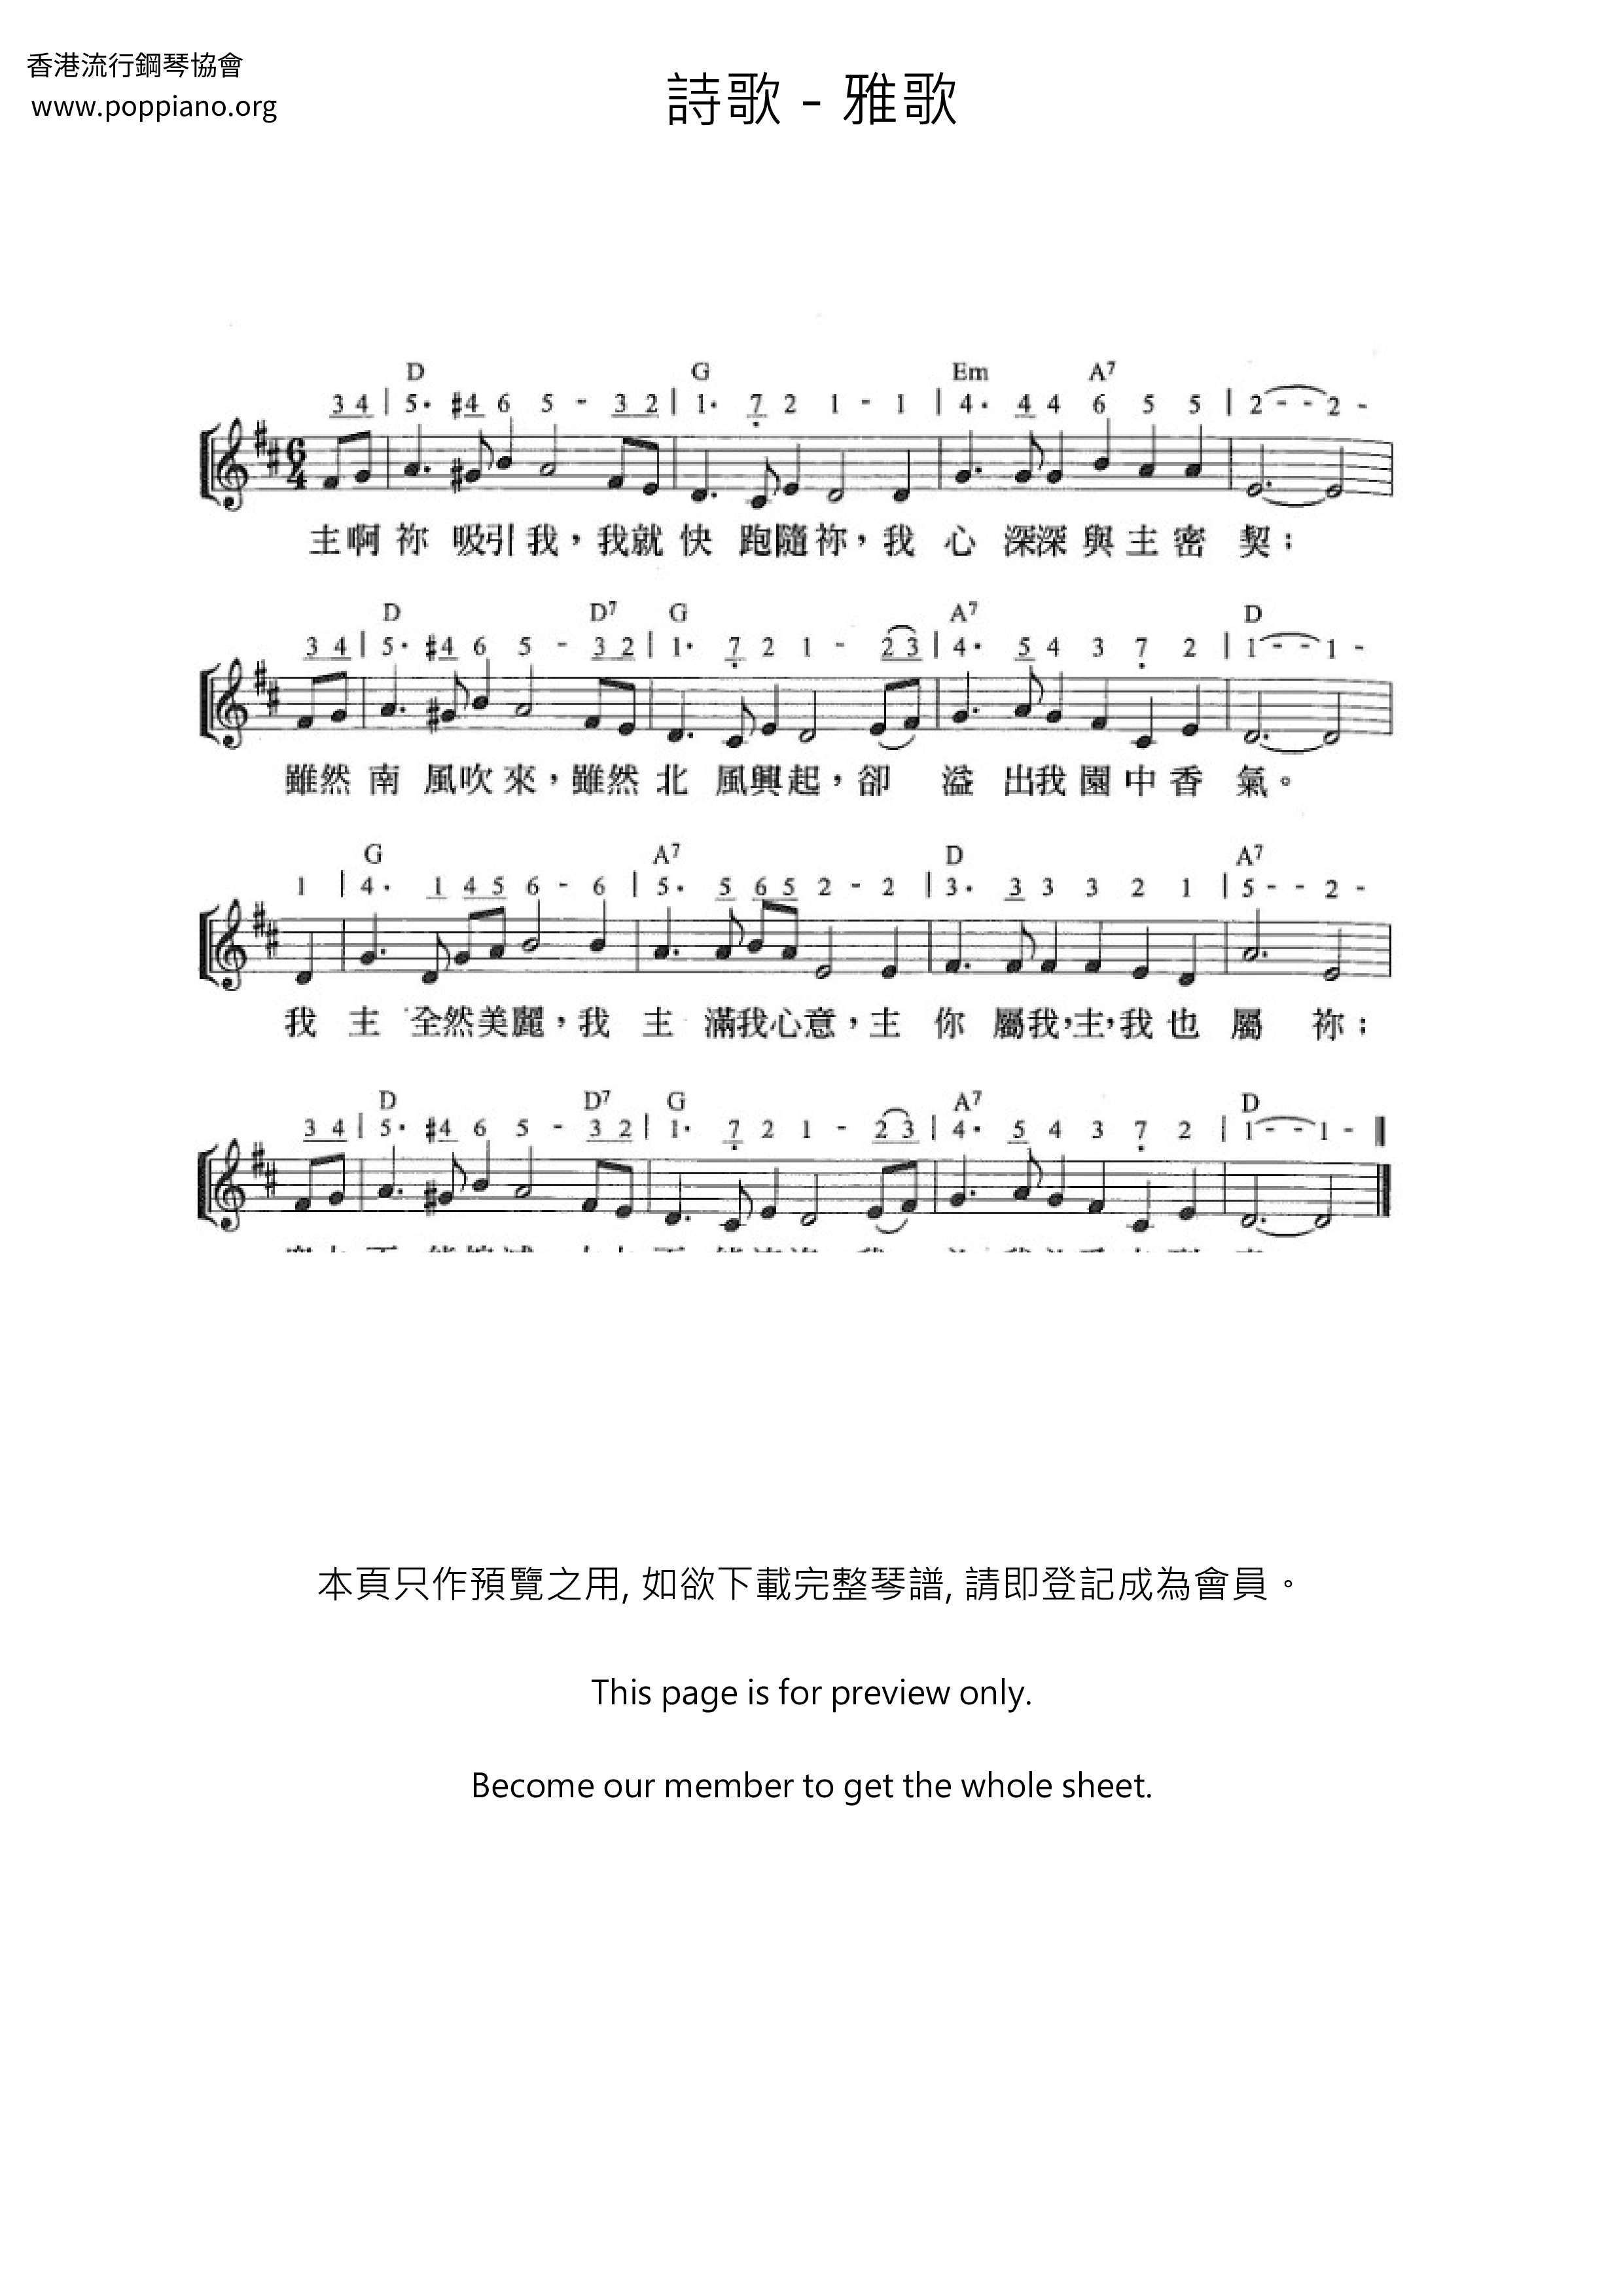 Song Of Songs Score